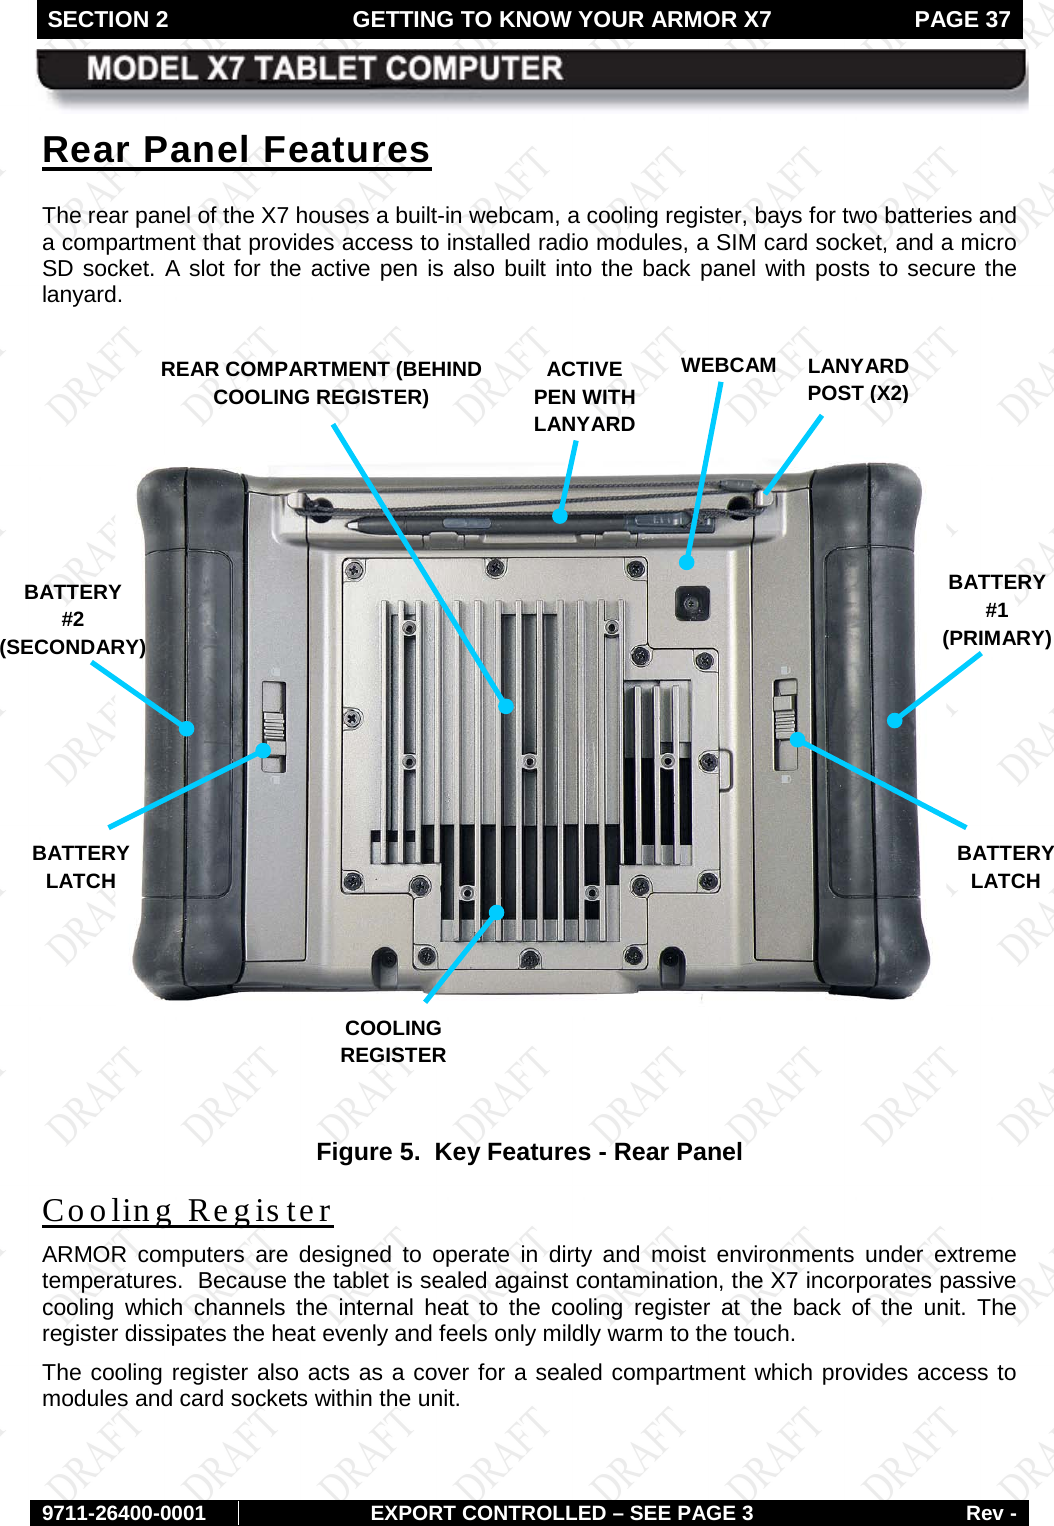 SECTION 2 GETTING TO KNOW YOUR ARMOR X7  PAGE 37        9711-26400-0001 EXPORT CONTROLLED – SEE PAGE 3 Rev - Rear Panel Features The rear panel of the X7 houses a built-in webcam, a cooling register, bays for two batteries and a compartment that provides access to installed radio modules, a SIM card socket, and a micro SD socket. A slot for the active pen is also built into the back panel with posts to secure the lanyard.       Figure 5.  Key Features - Rear Panel Cooling Register ARMOR computers are designed to operate in dirty and moist environments under extreme temperatures.  Because the tablet is sealed against contamination, the X7 incorporates passive cooling which channels the internal heat to the cooling register at the back of the unit. The register dissipates the heat evenly and feels only mildly warm to the touch. The cooling register also acts as a cover for a sealed compartment which provides access to modules and card sockets within the unit.    REAR COMPARTMENT (BEHIND COOLING REGISTER) BATTERY  #2 (SECONDARY) COOLING REGISTER BATTERY  #1 (PRIMARY) WEBCAM ACTIVE PEN WITH LANYARD BATTERY  LATCH BATTERY  LATCH LANYARD POST (X2) 